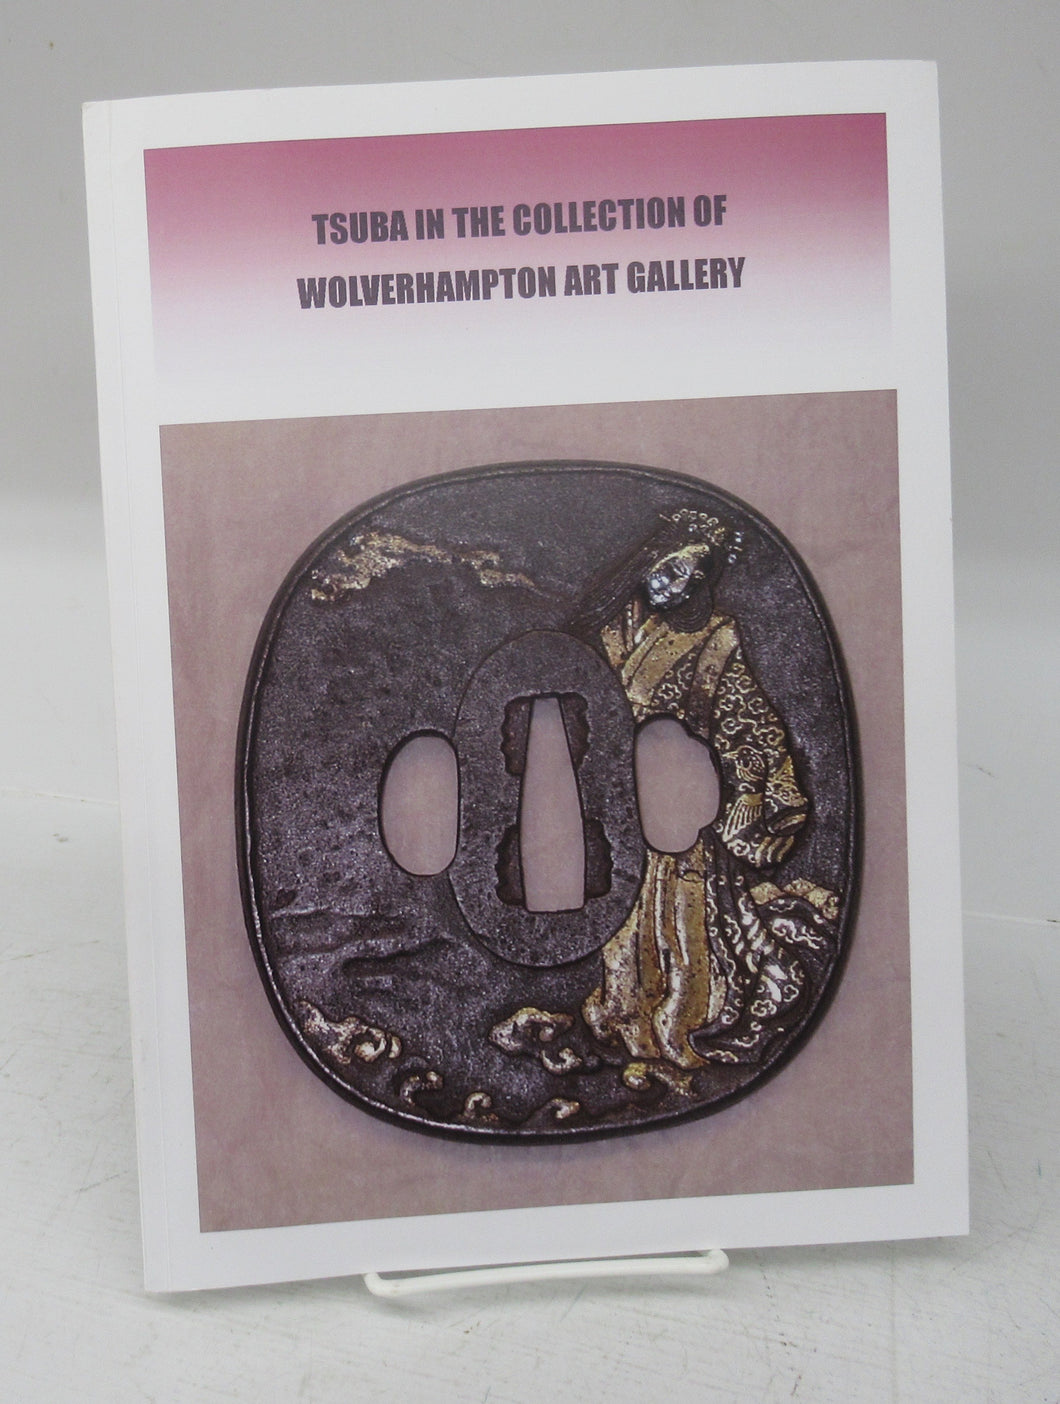 Tsuba in the Collection of Wolverhampton Art Gallery